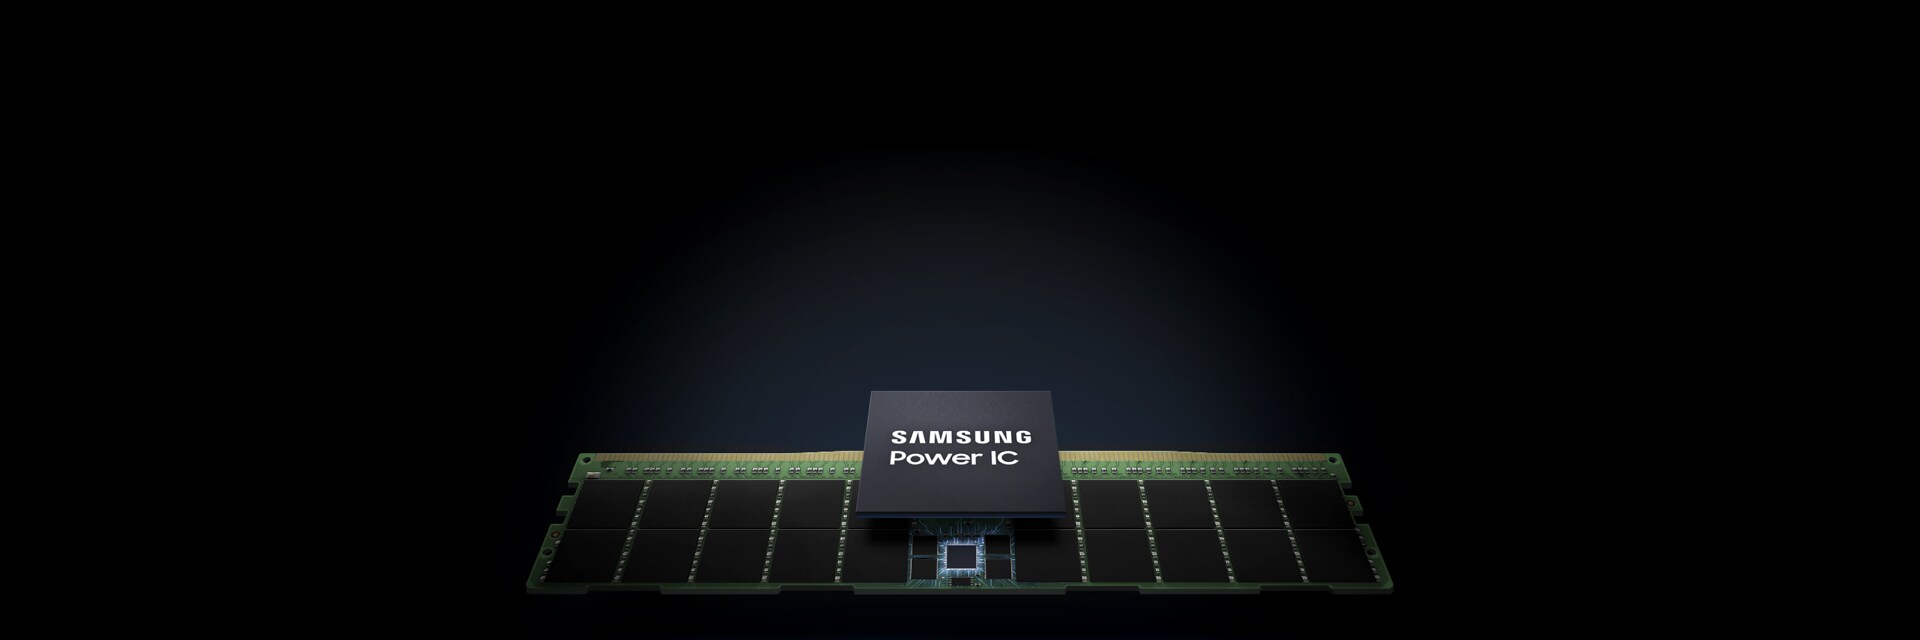 Samsung Semiconductor's Memory Power IC offers stable and efficient power management.